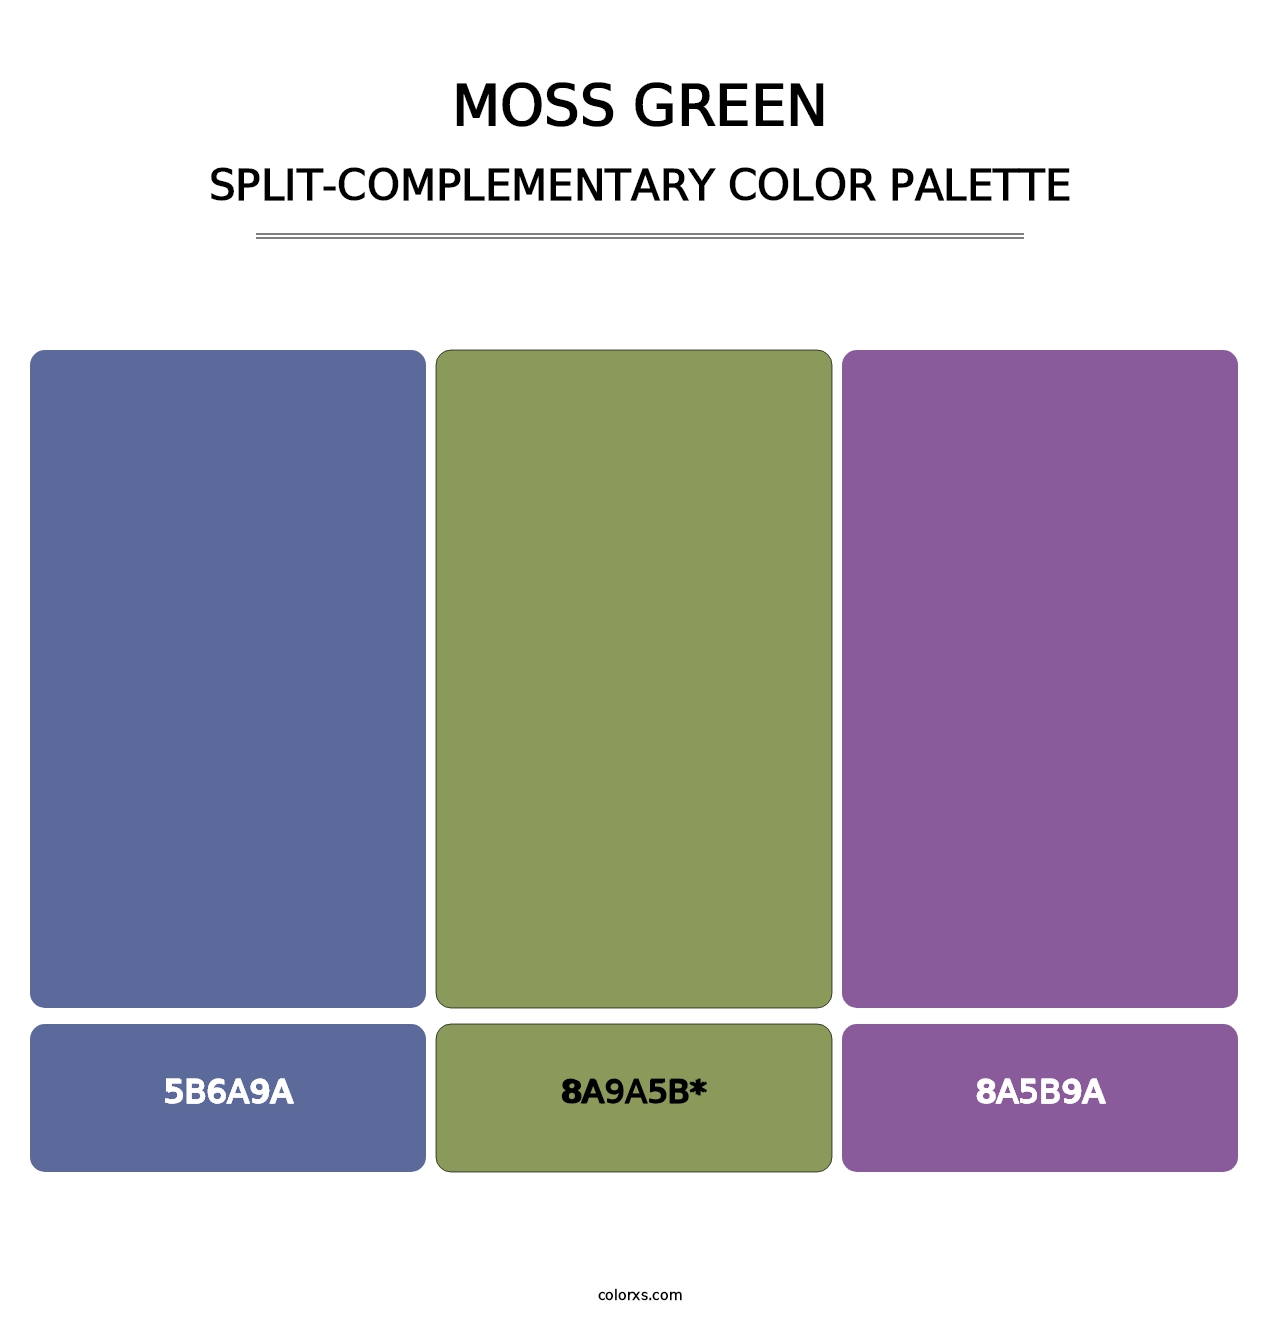 Moss Green - Split-Complementary Color Palette